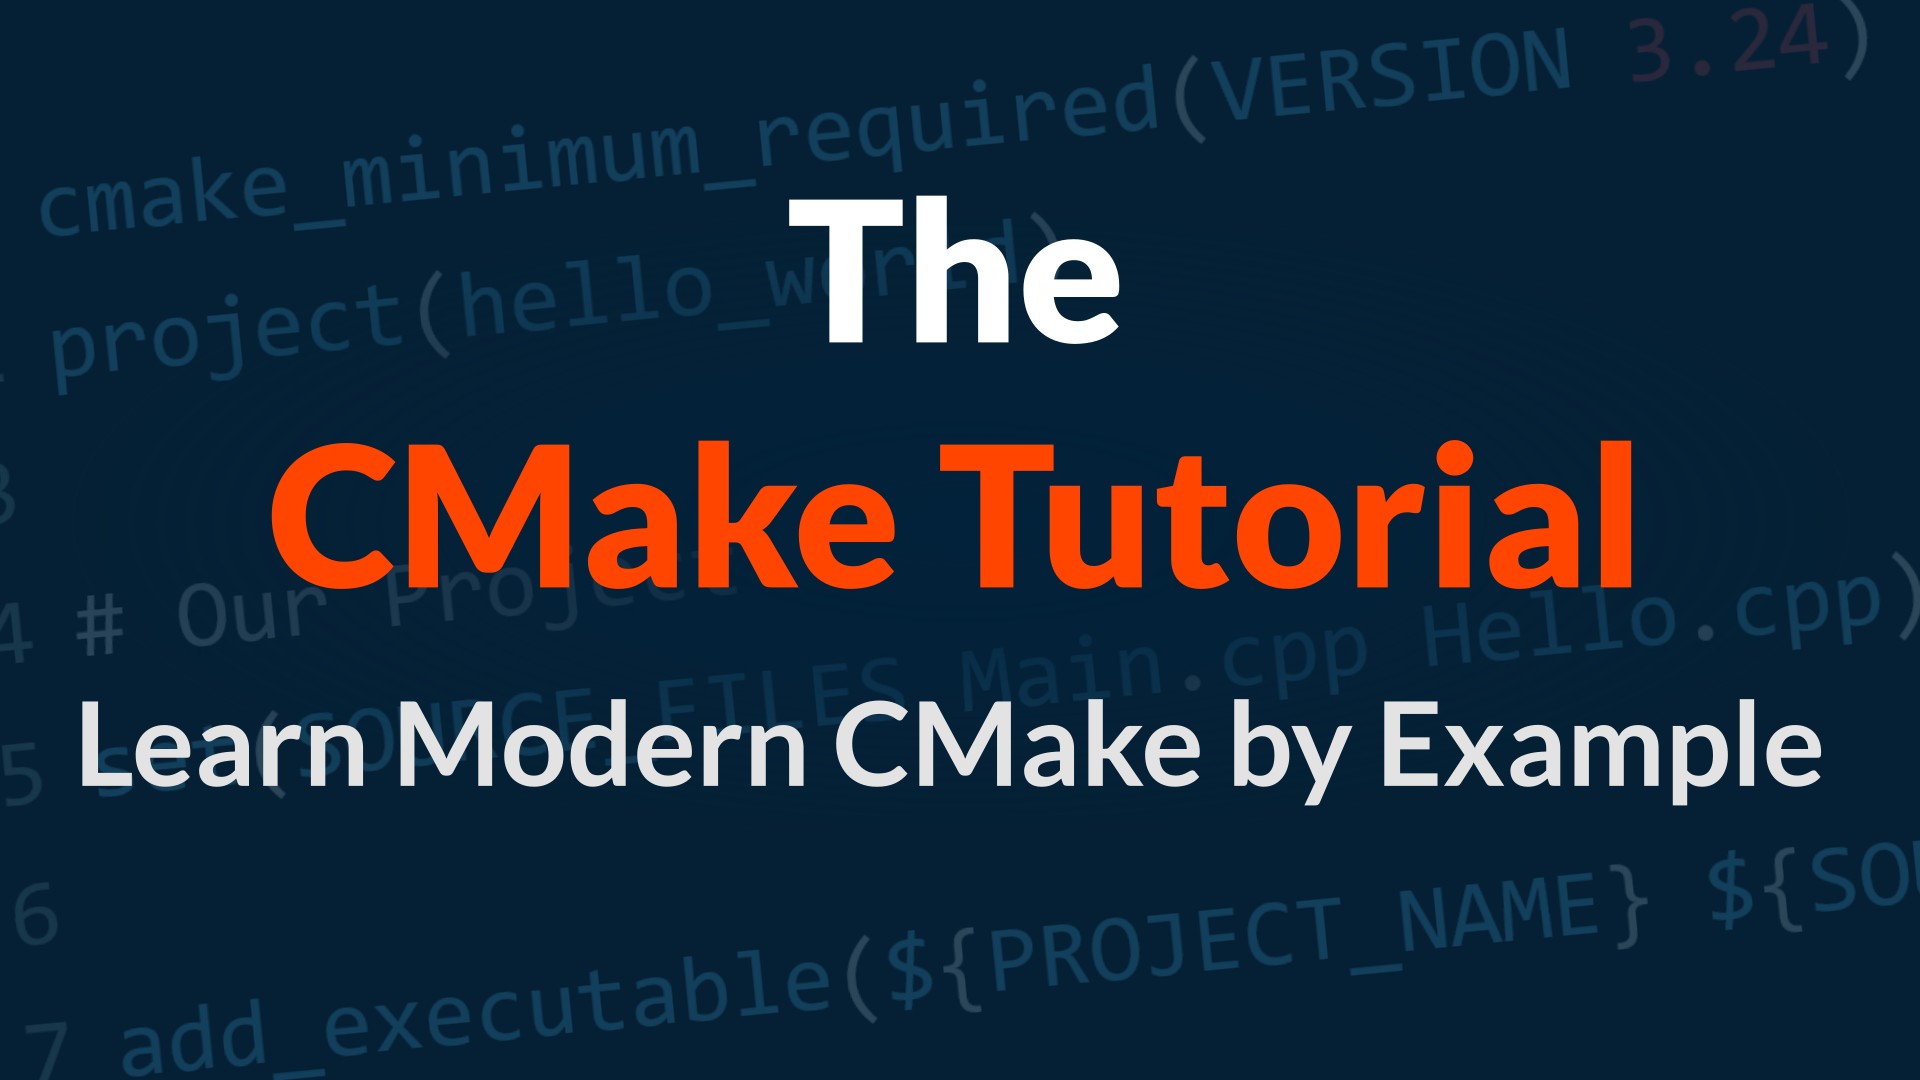 The CMake Tutorial Learn Modern CMake by Example » Kea Sigma Delta